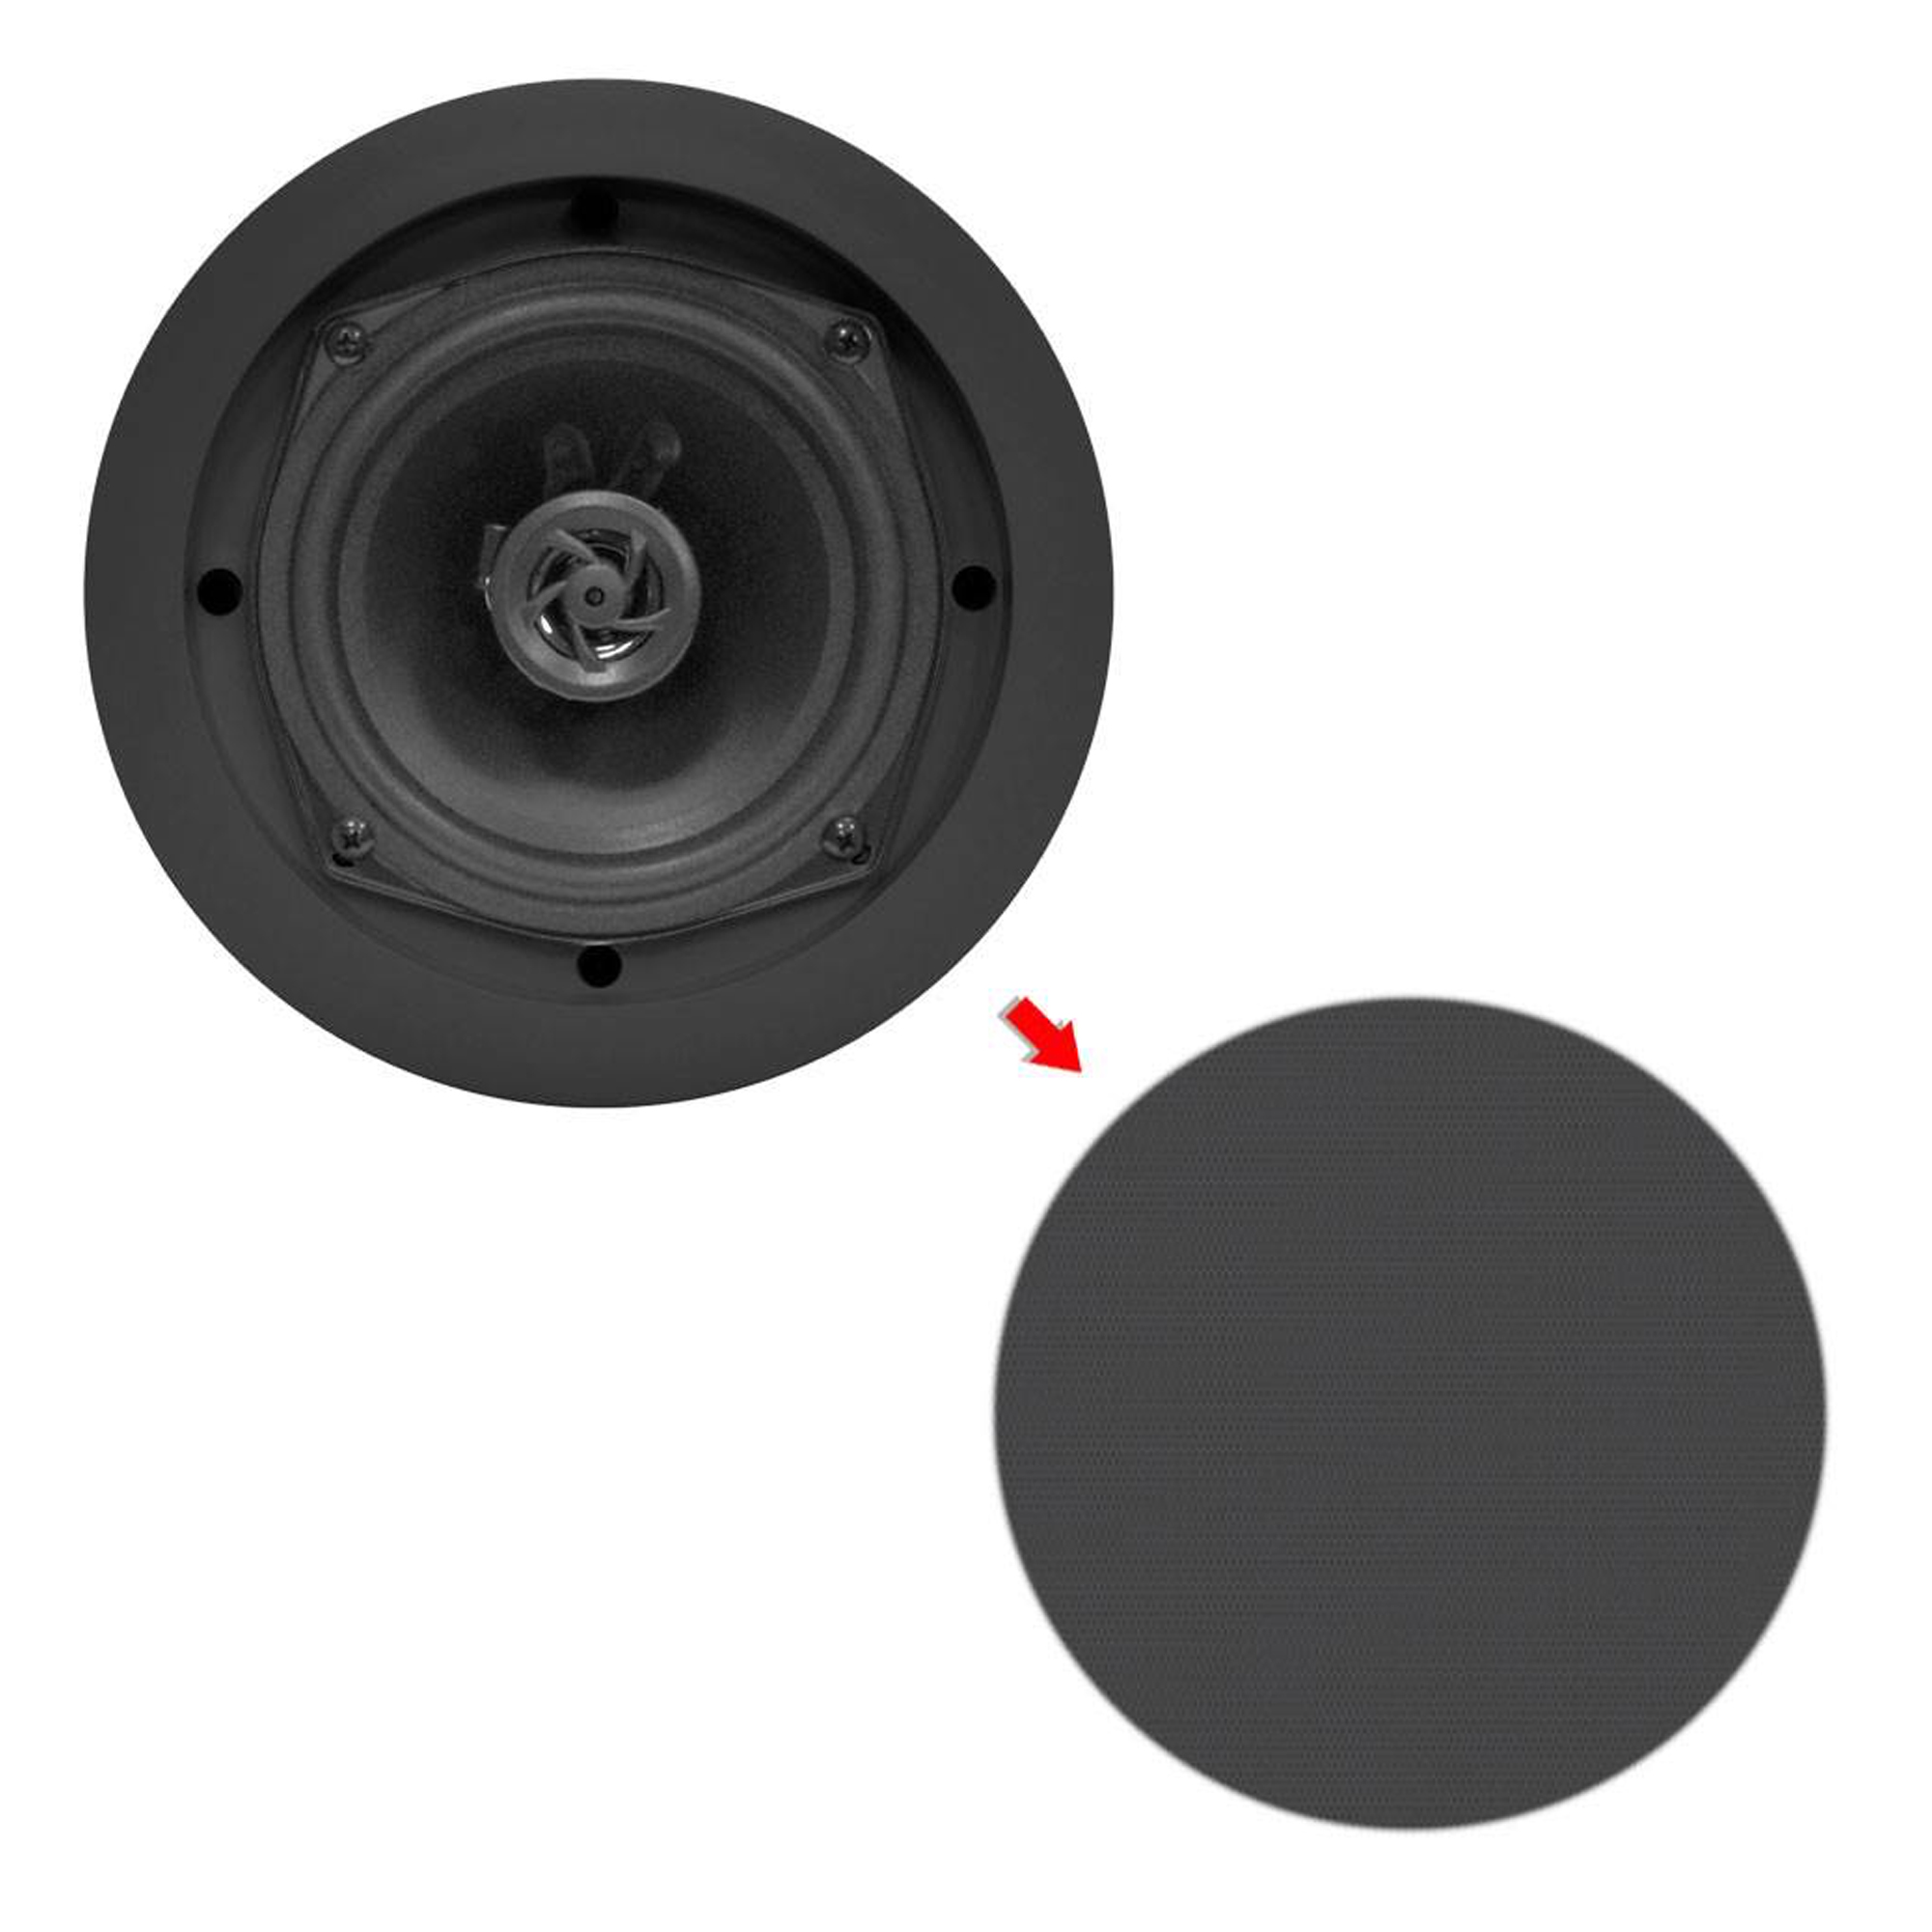 Pyle PDIC81RDBK 250W 8 Inch Flush In-Wall In-Ceiling Black Speakers (6 Pairs) - image 4 of 5